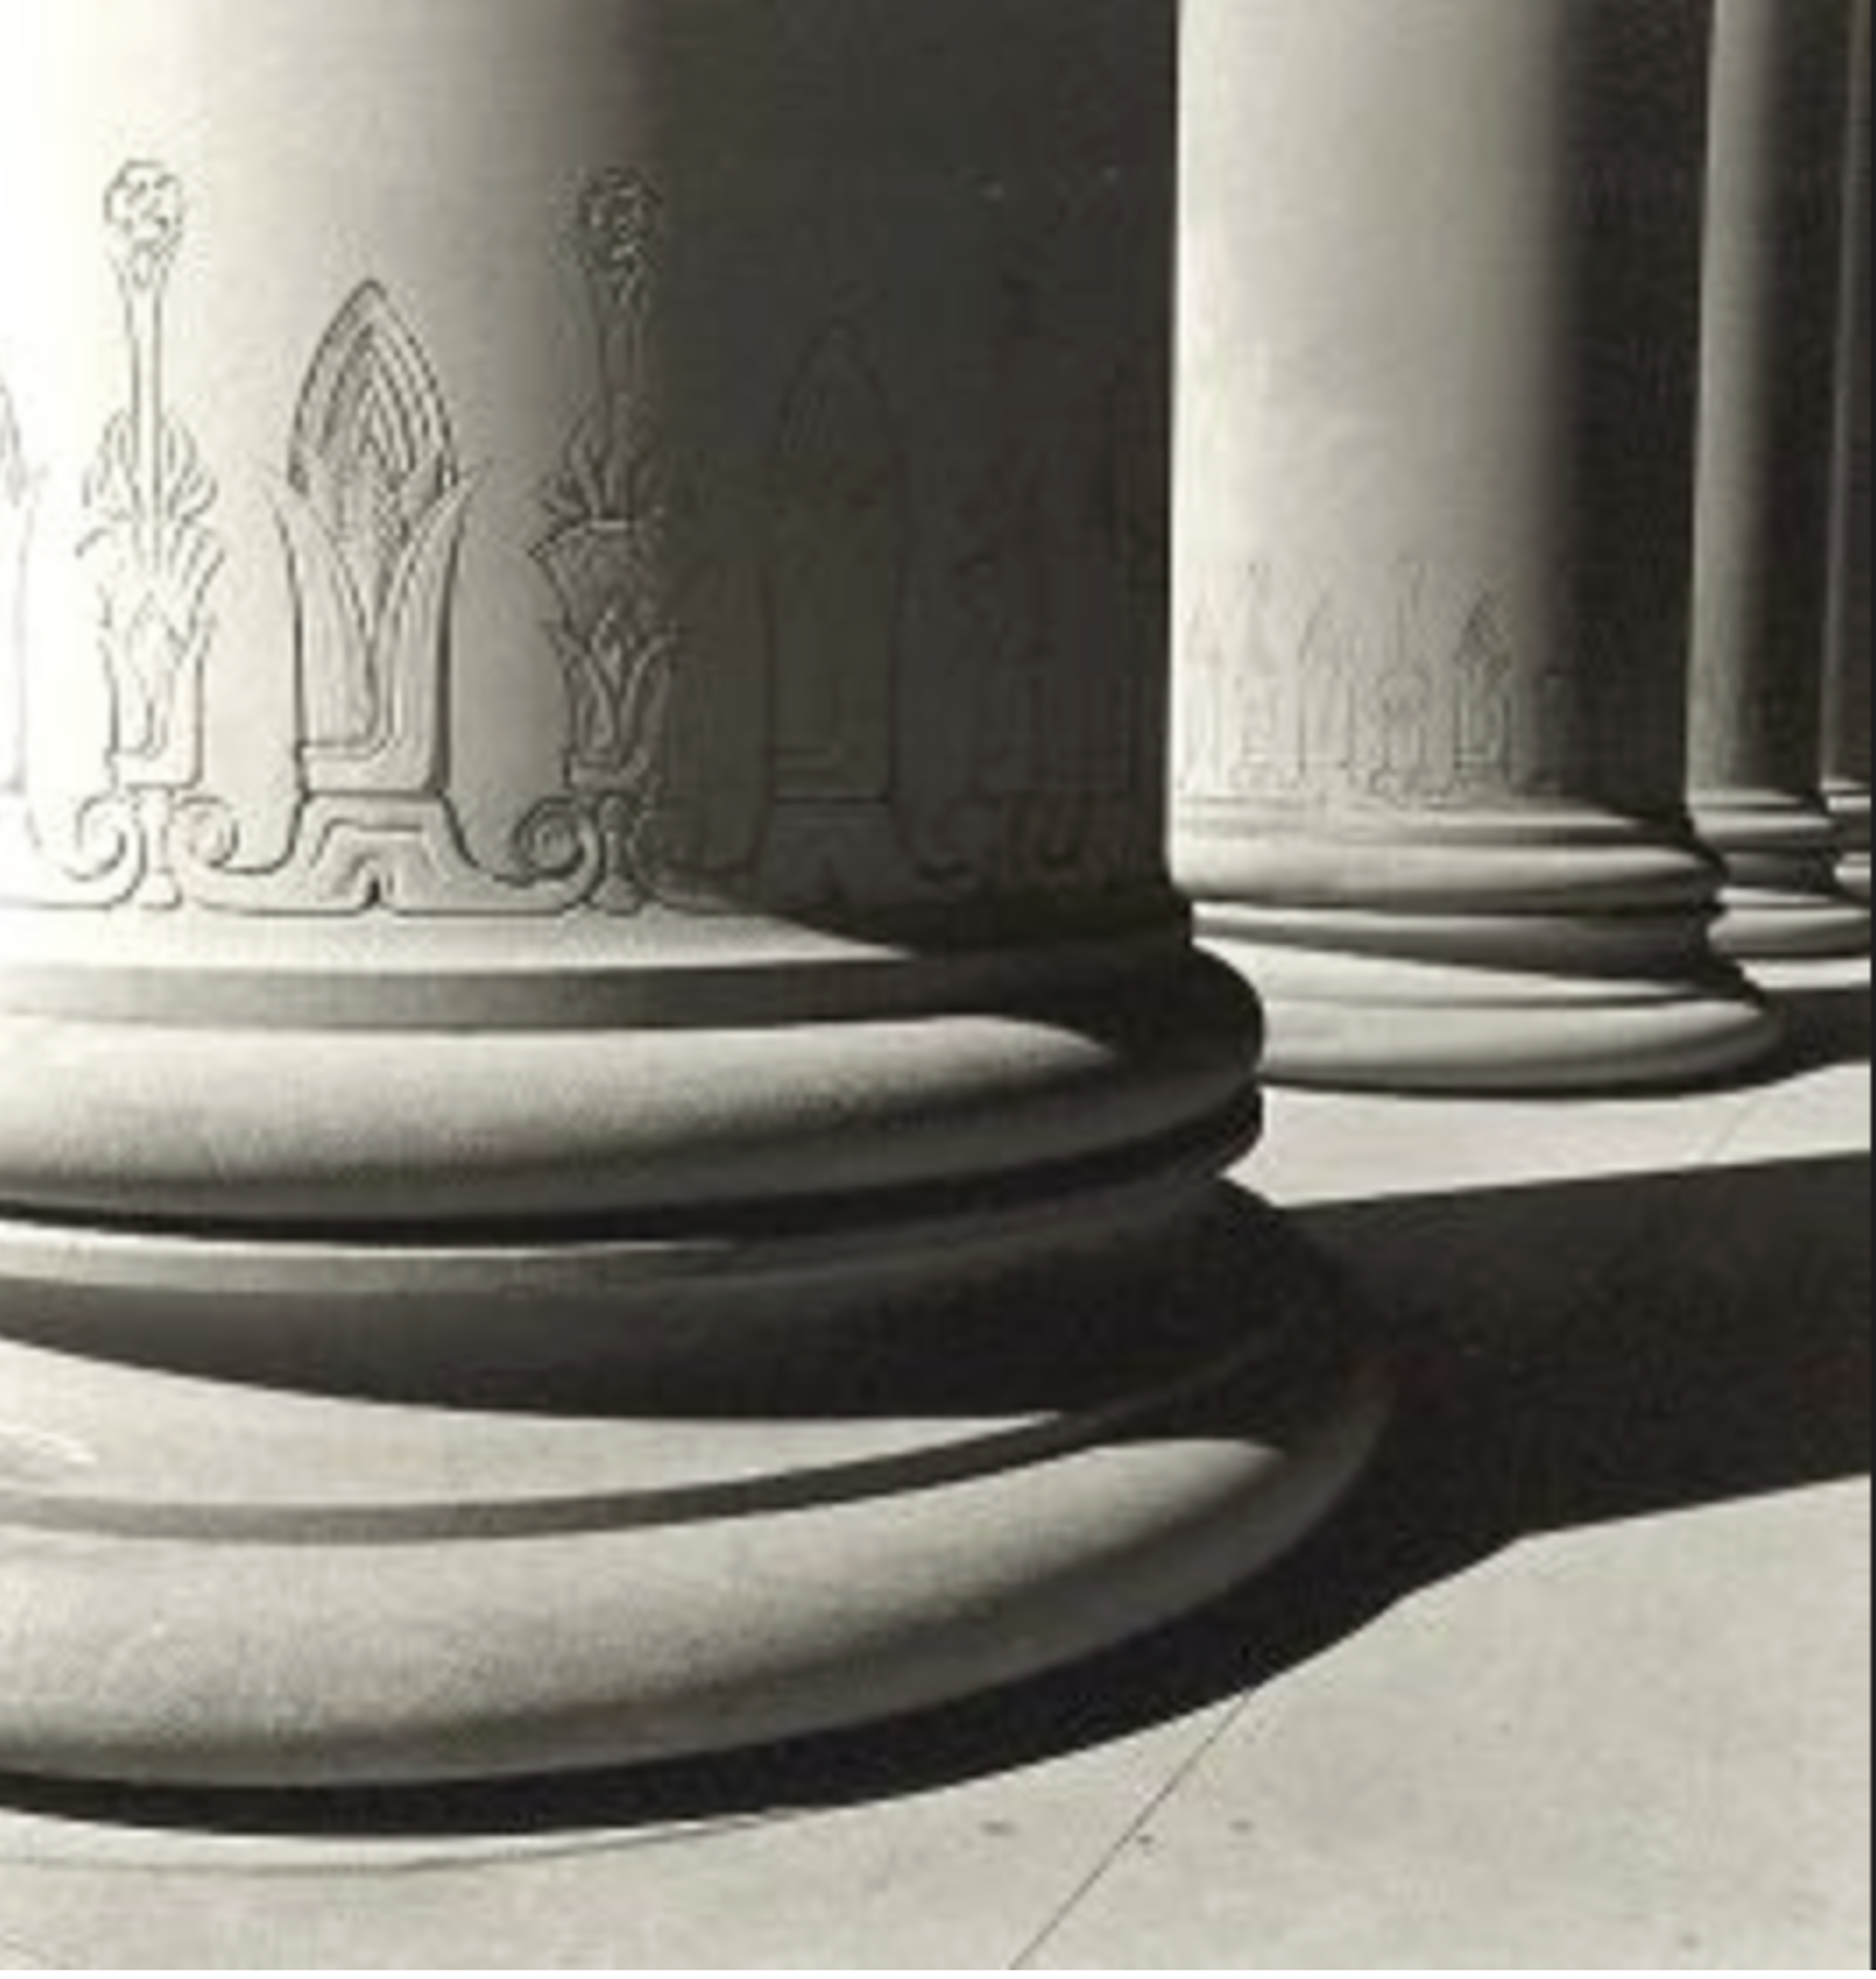 Columns & Shadows by Mike McMullen